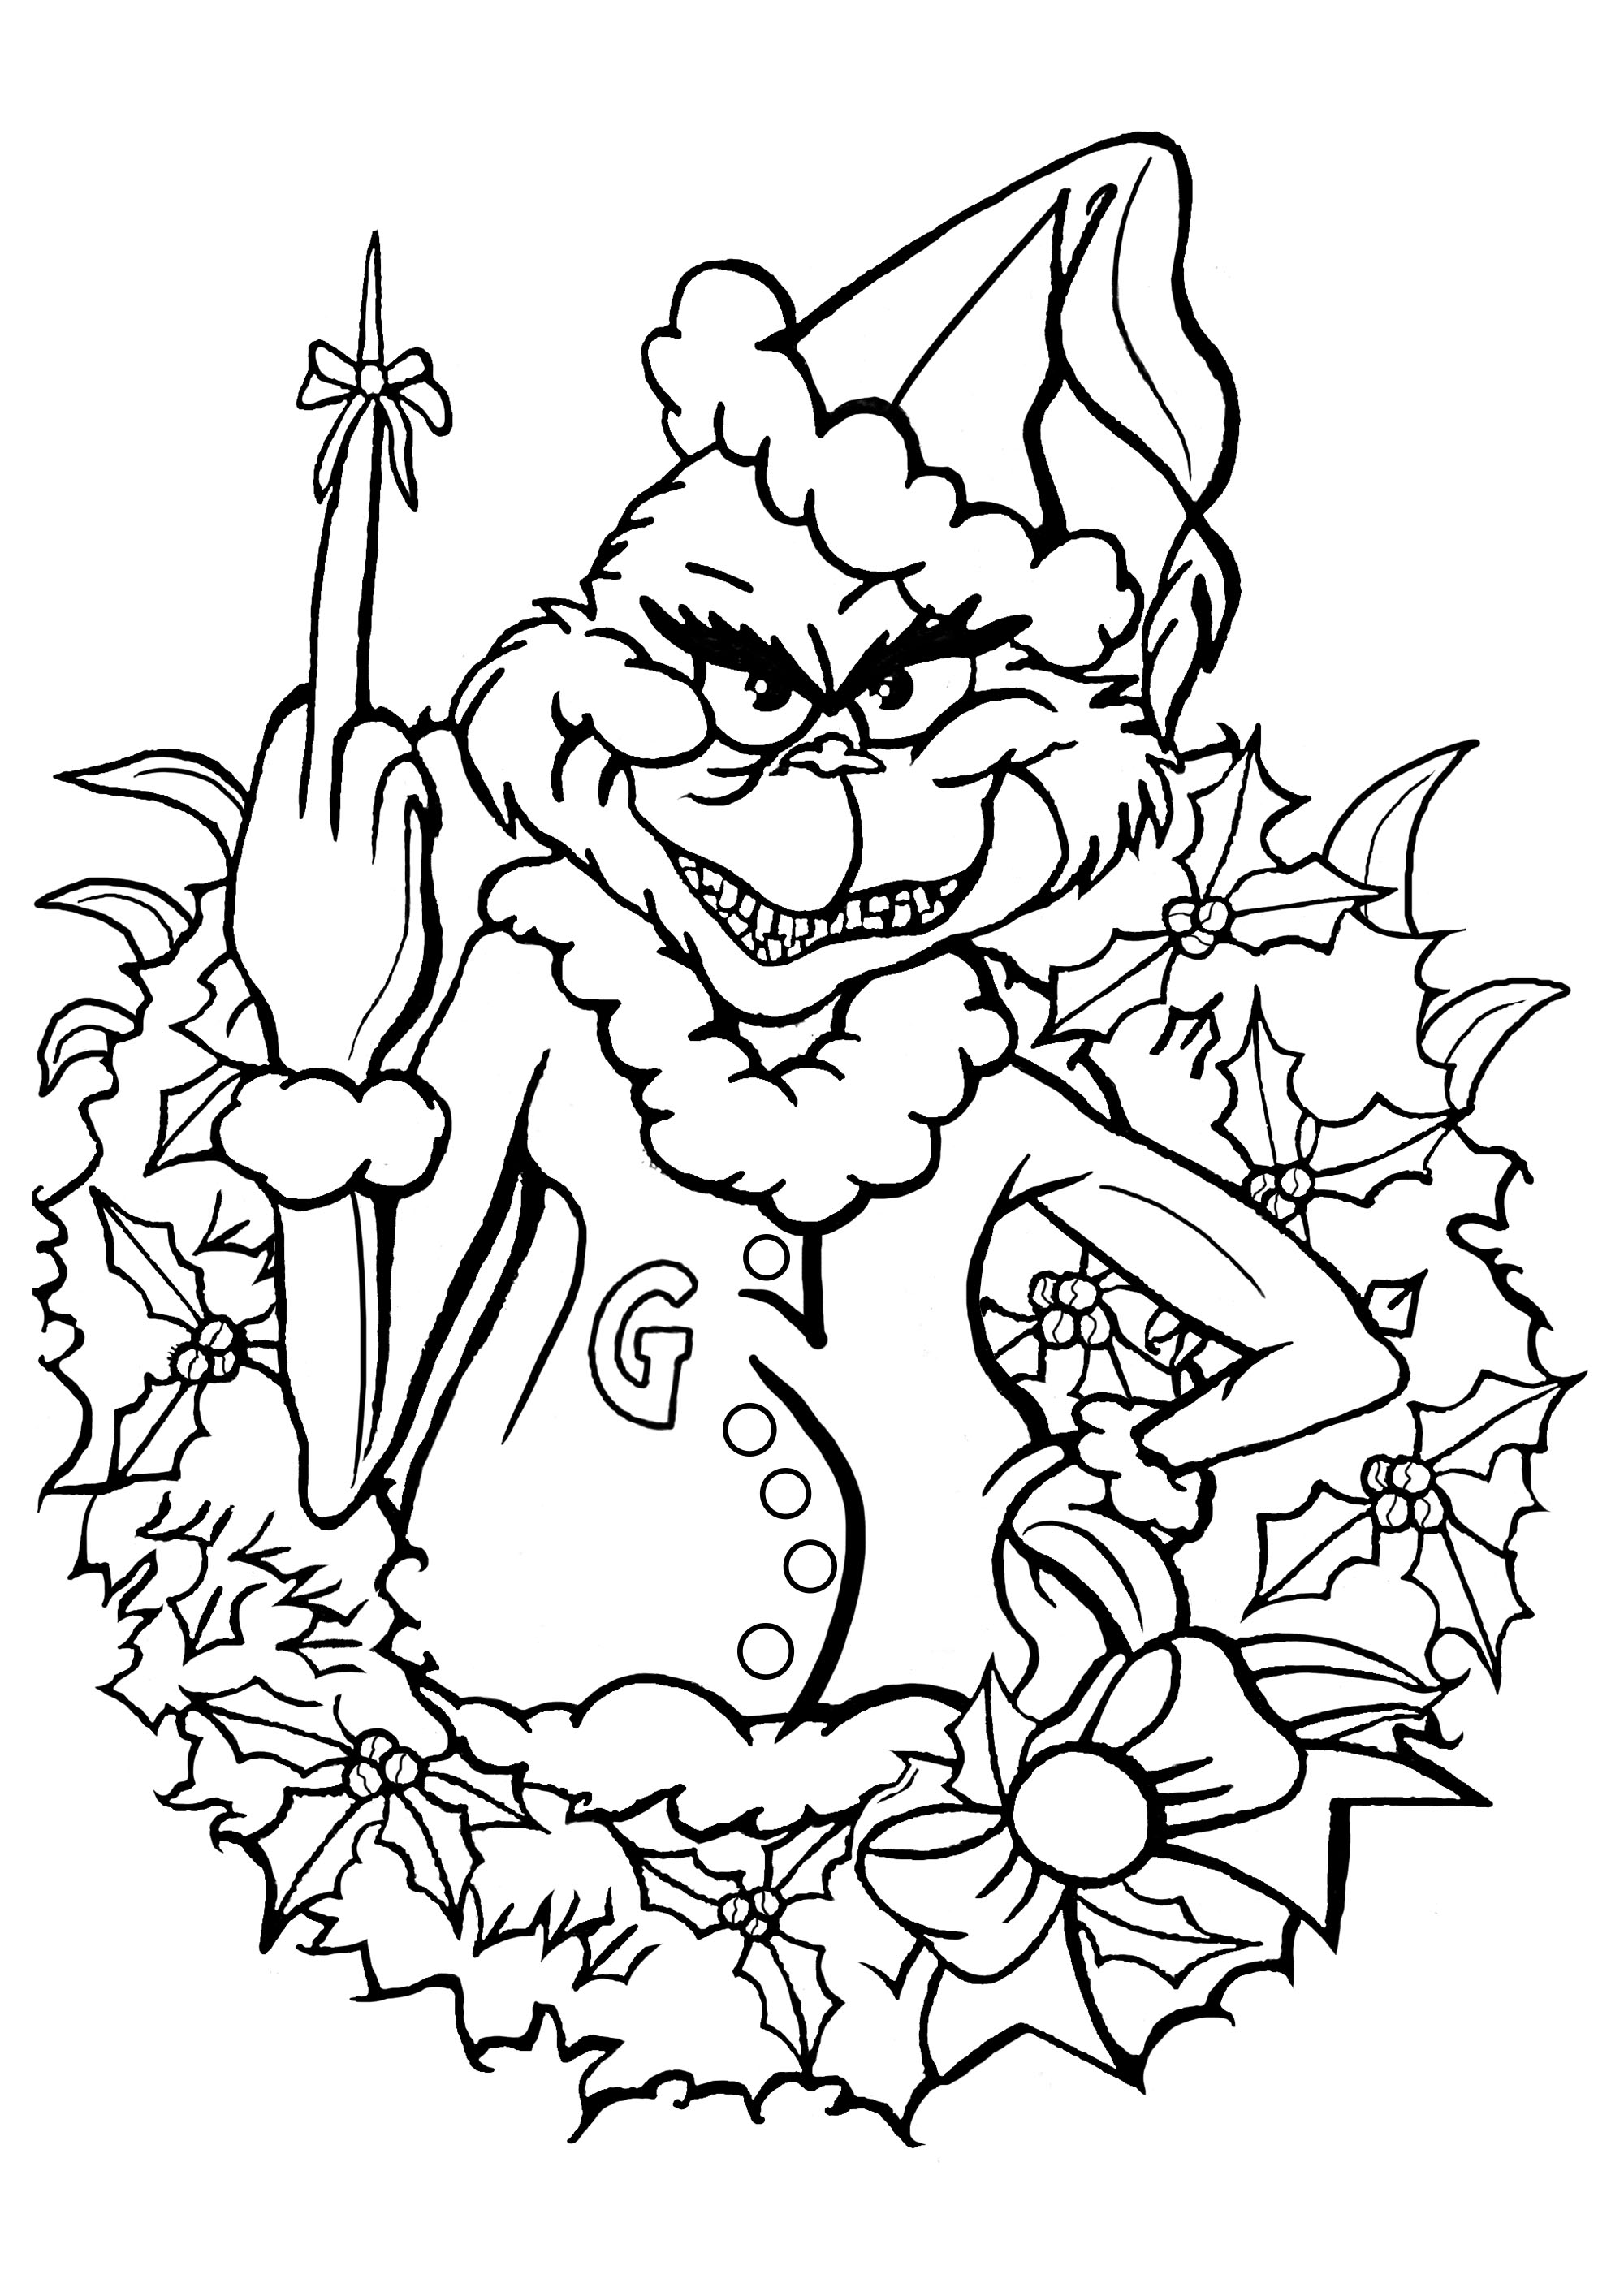 Scary Grinch With Wreath Coloring Page Free Printable Coloring Pages